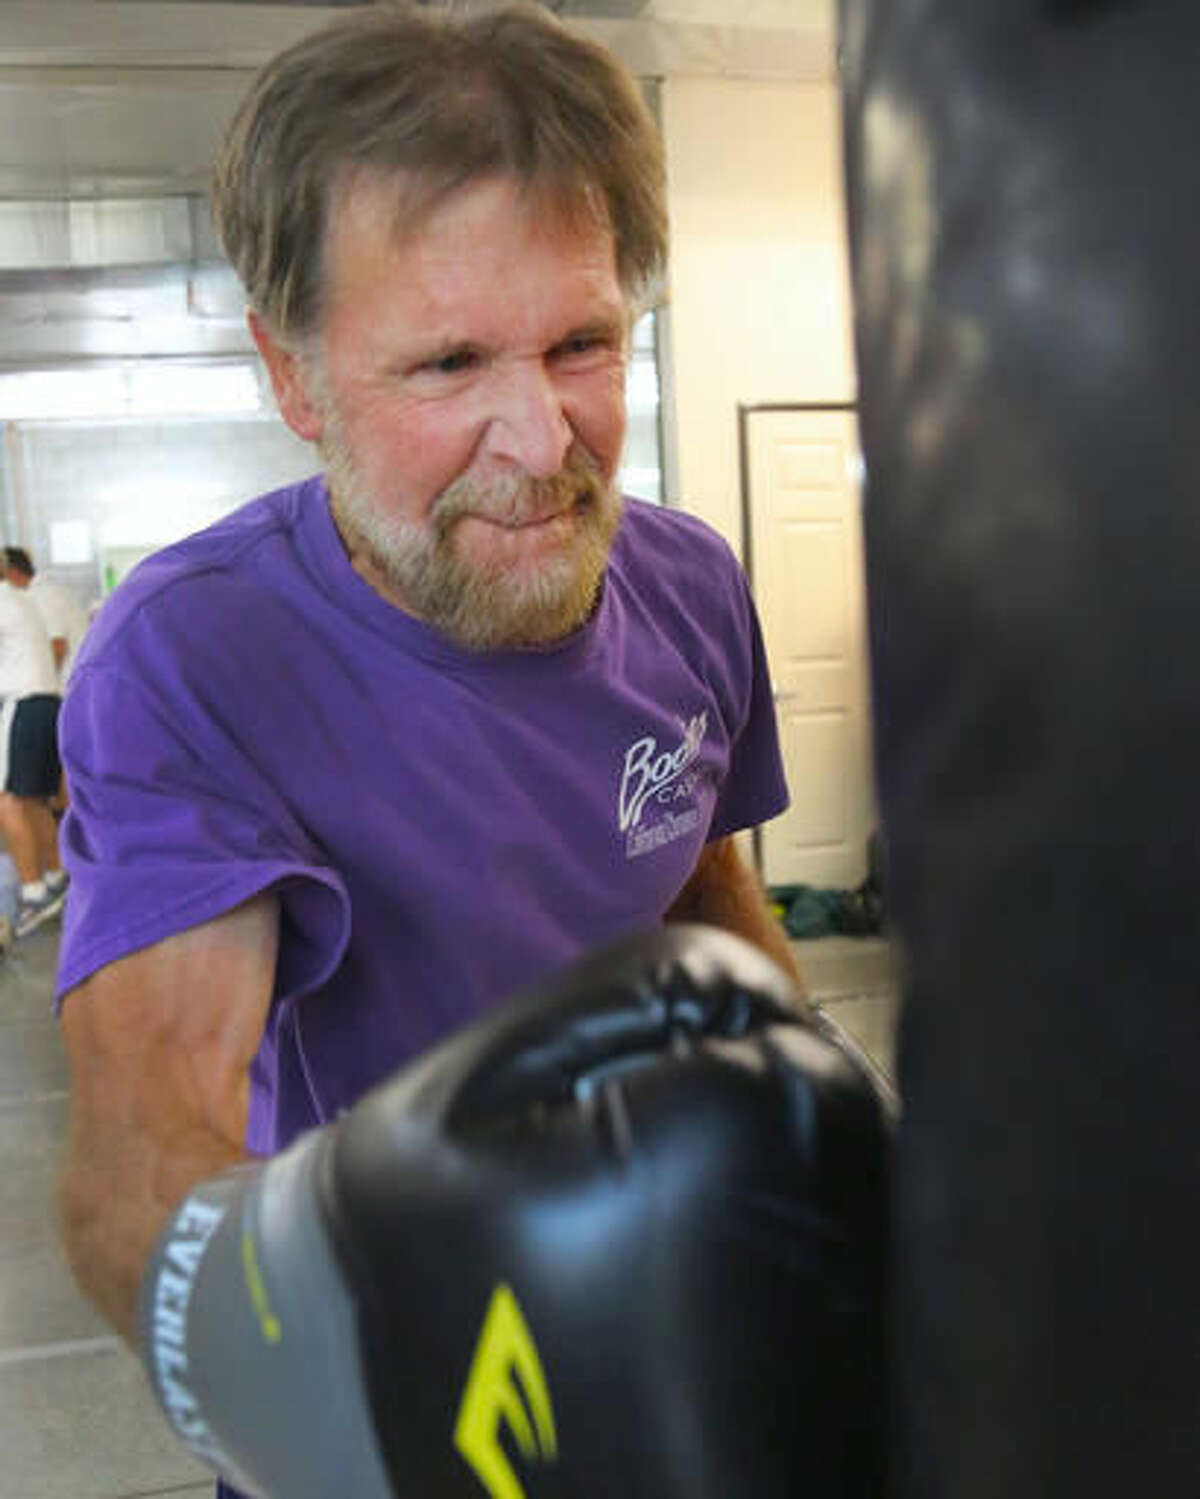 In this Monday, Sept. 19, 2016 photo, Rick Gutierrez punches a body bag during the Parkinson's boxing program at the Tazmanian Boxing Club in Carson City, Nev. (Jim Grant /Nevada Appeal via AP)